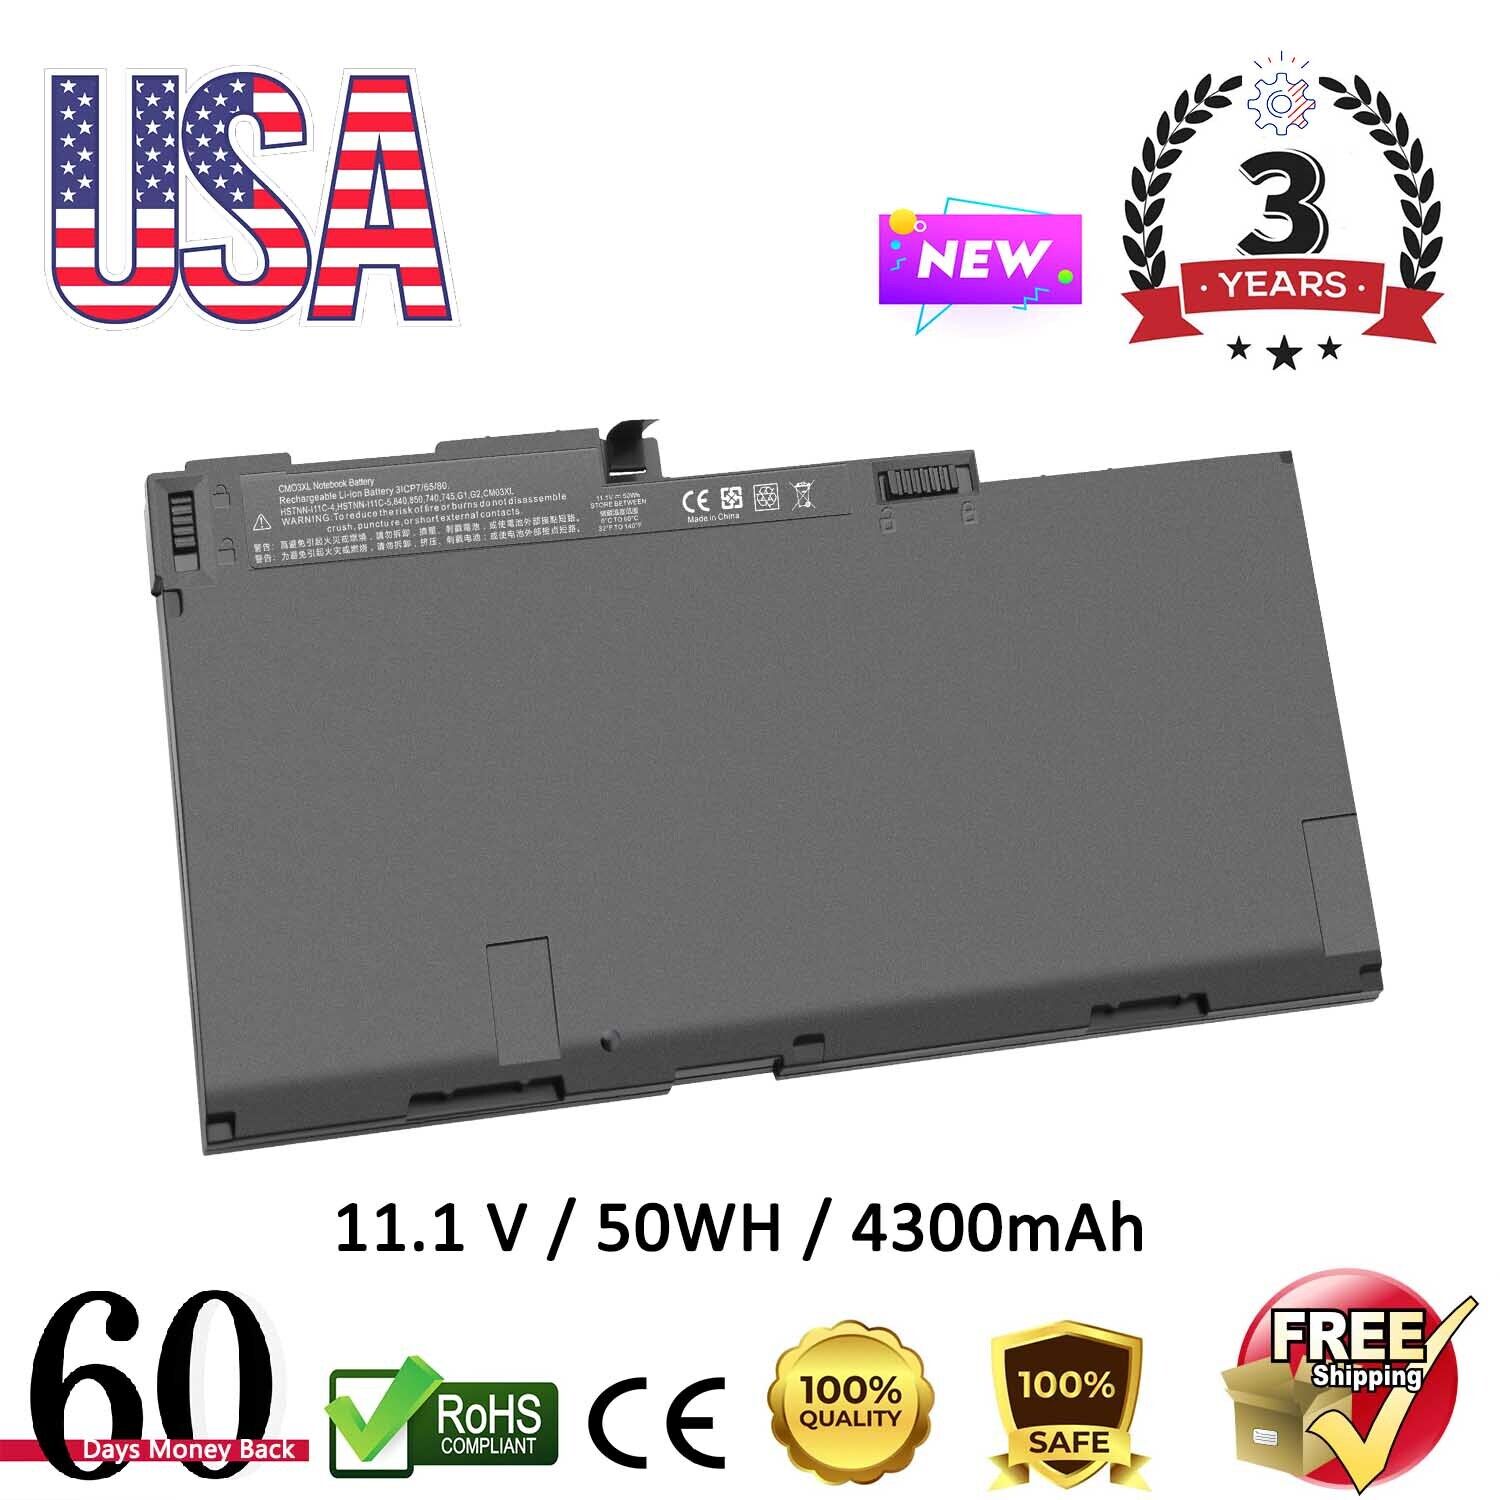 CM03XL Battery for HP EliteBook 840 740 745 750 G1 G2 Series Spare 717376-001 US